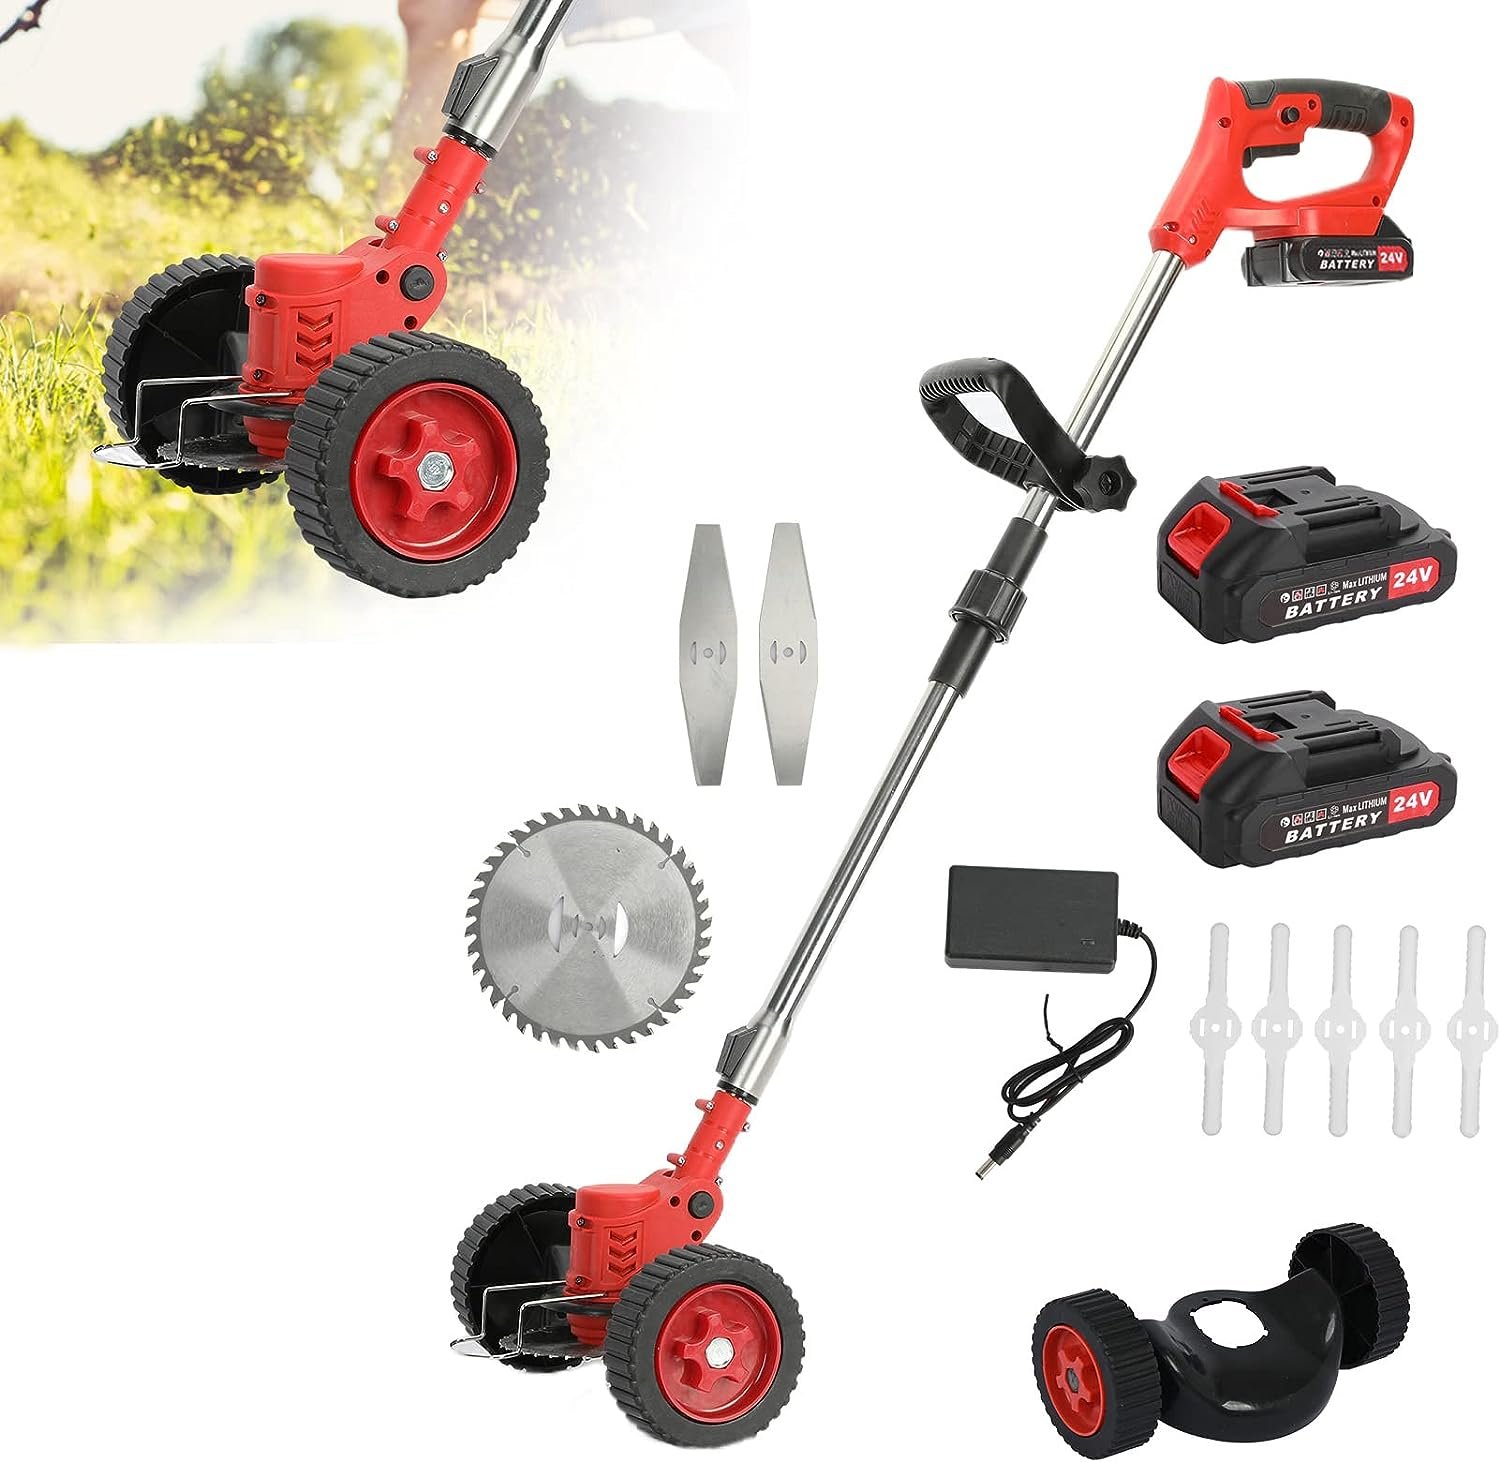 Electric Lawn Mower Grass Trimmer Review